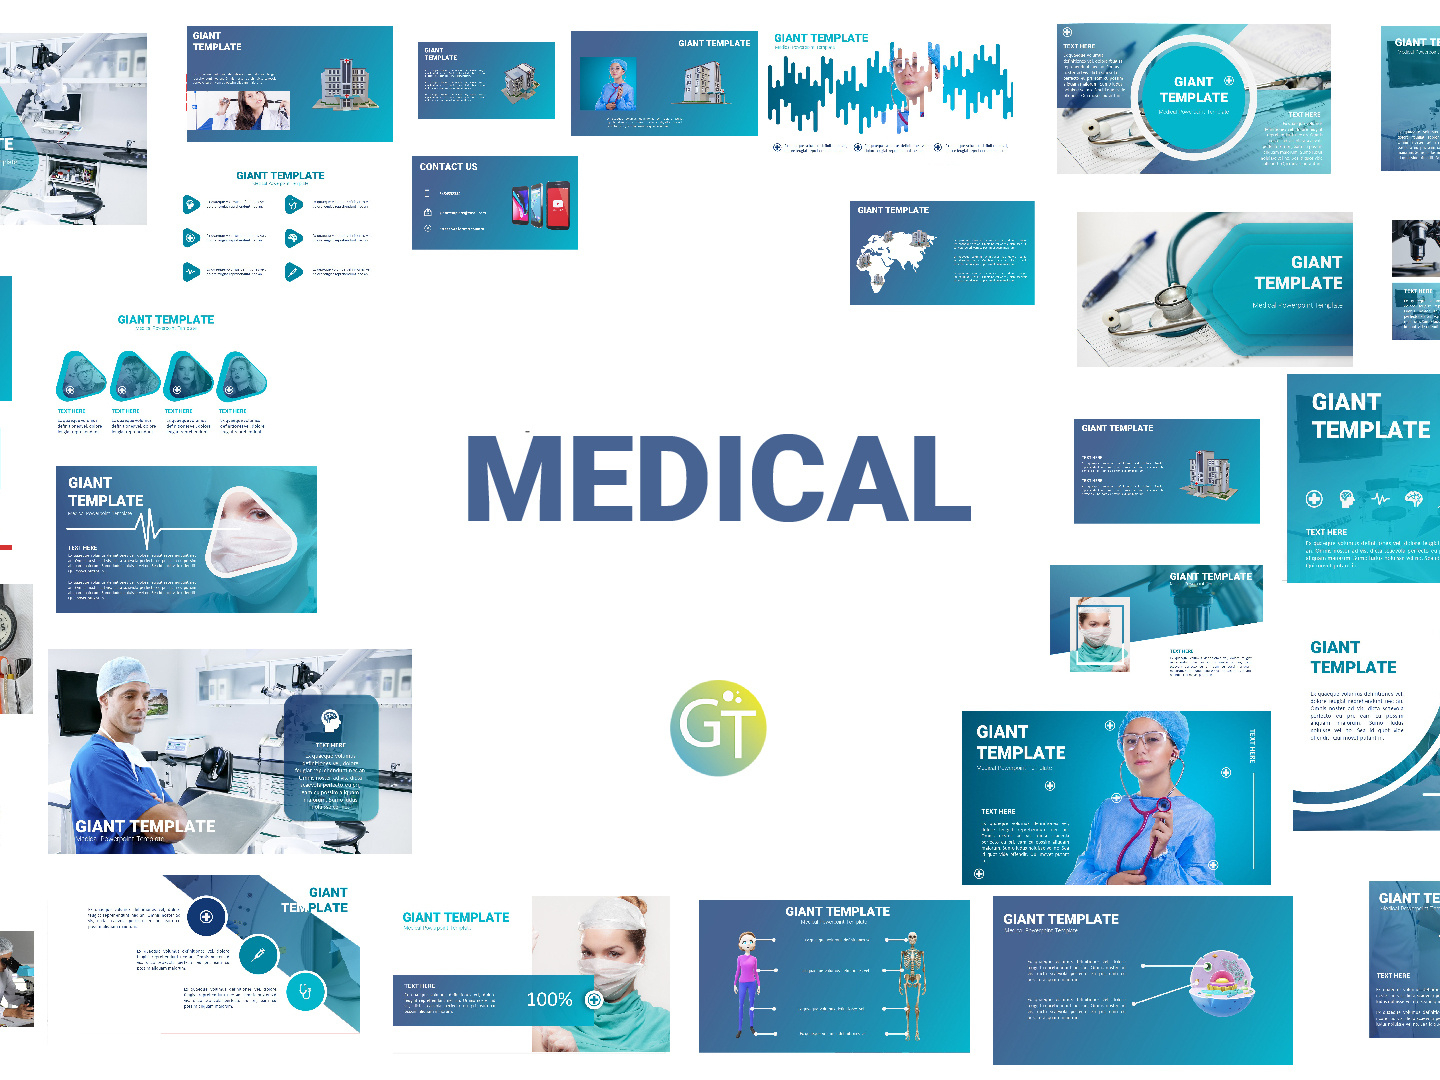 Medical Powerpoint Templates Free Downloadgiant Template Throughout Powerpoint Animation Templates Free Download